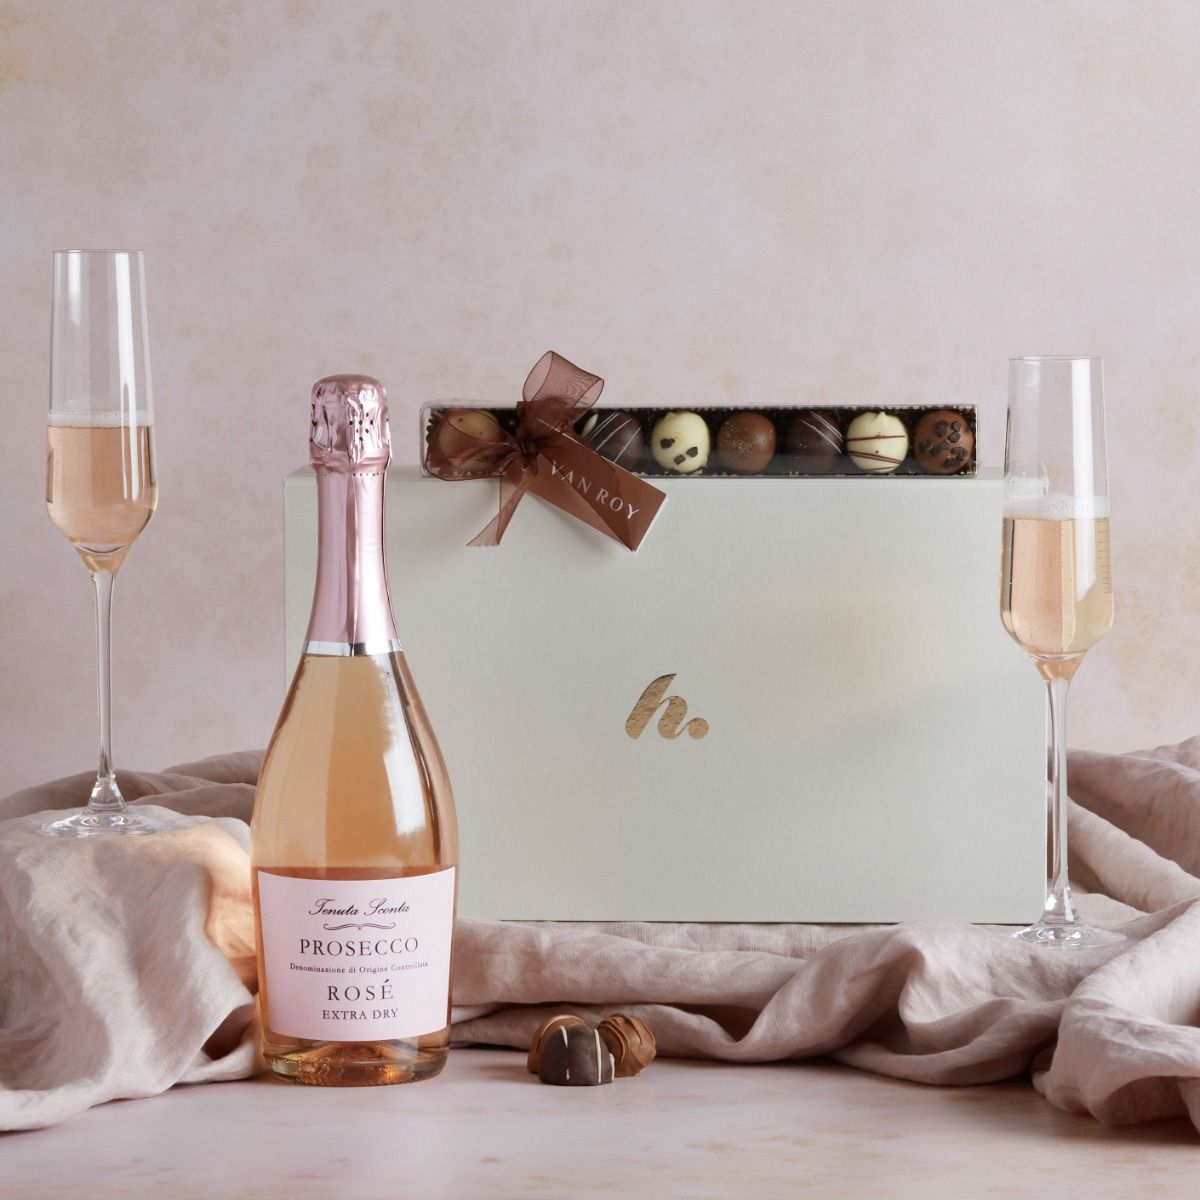 Valentine's prosecco rosé & truffles hamper with contents on display